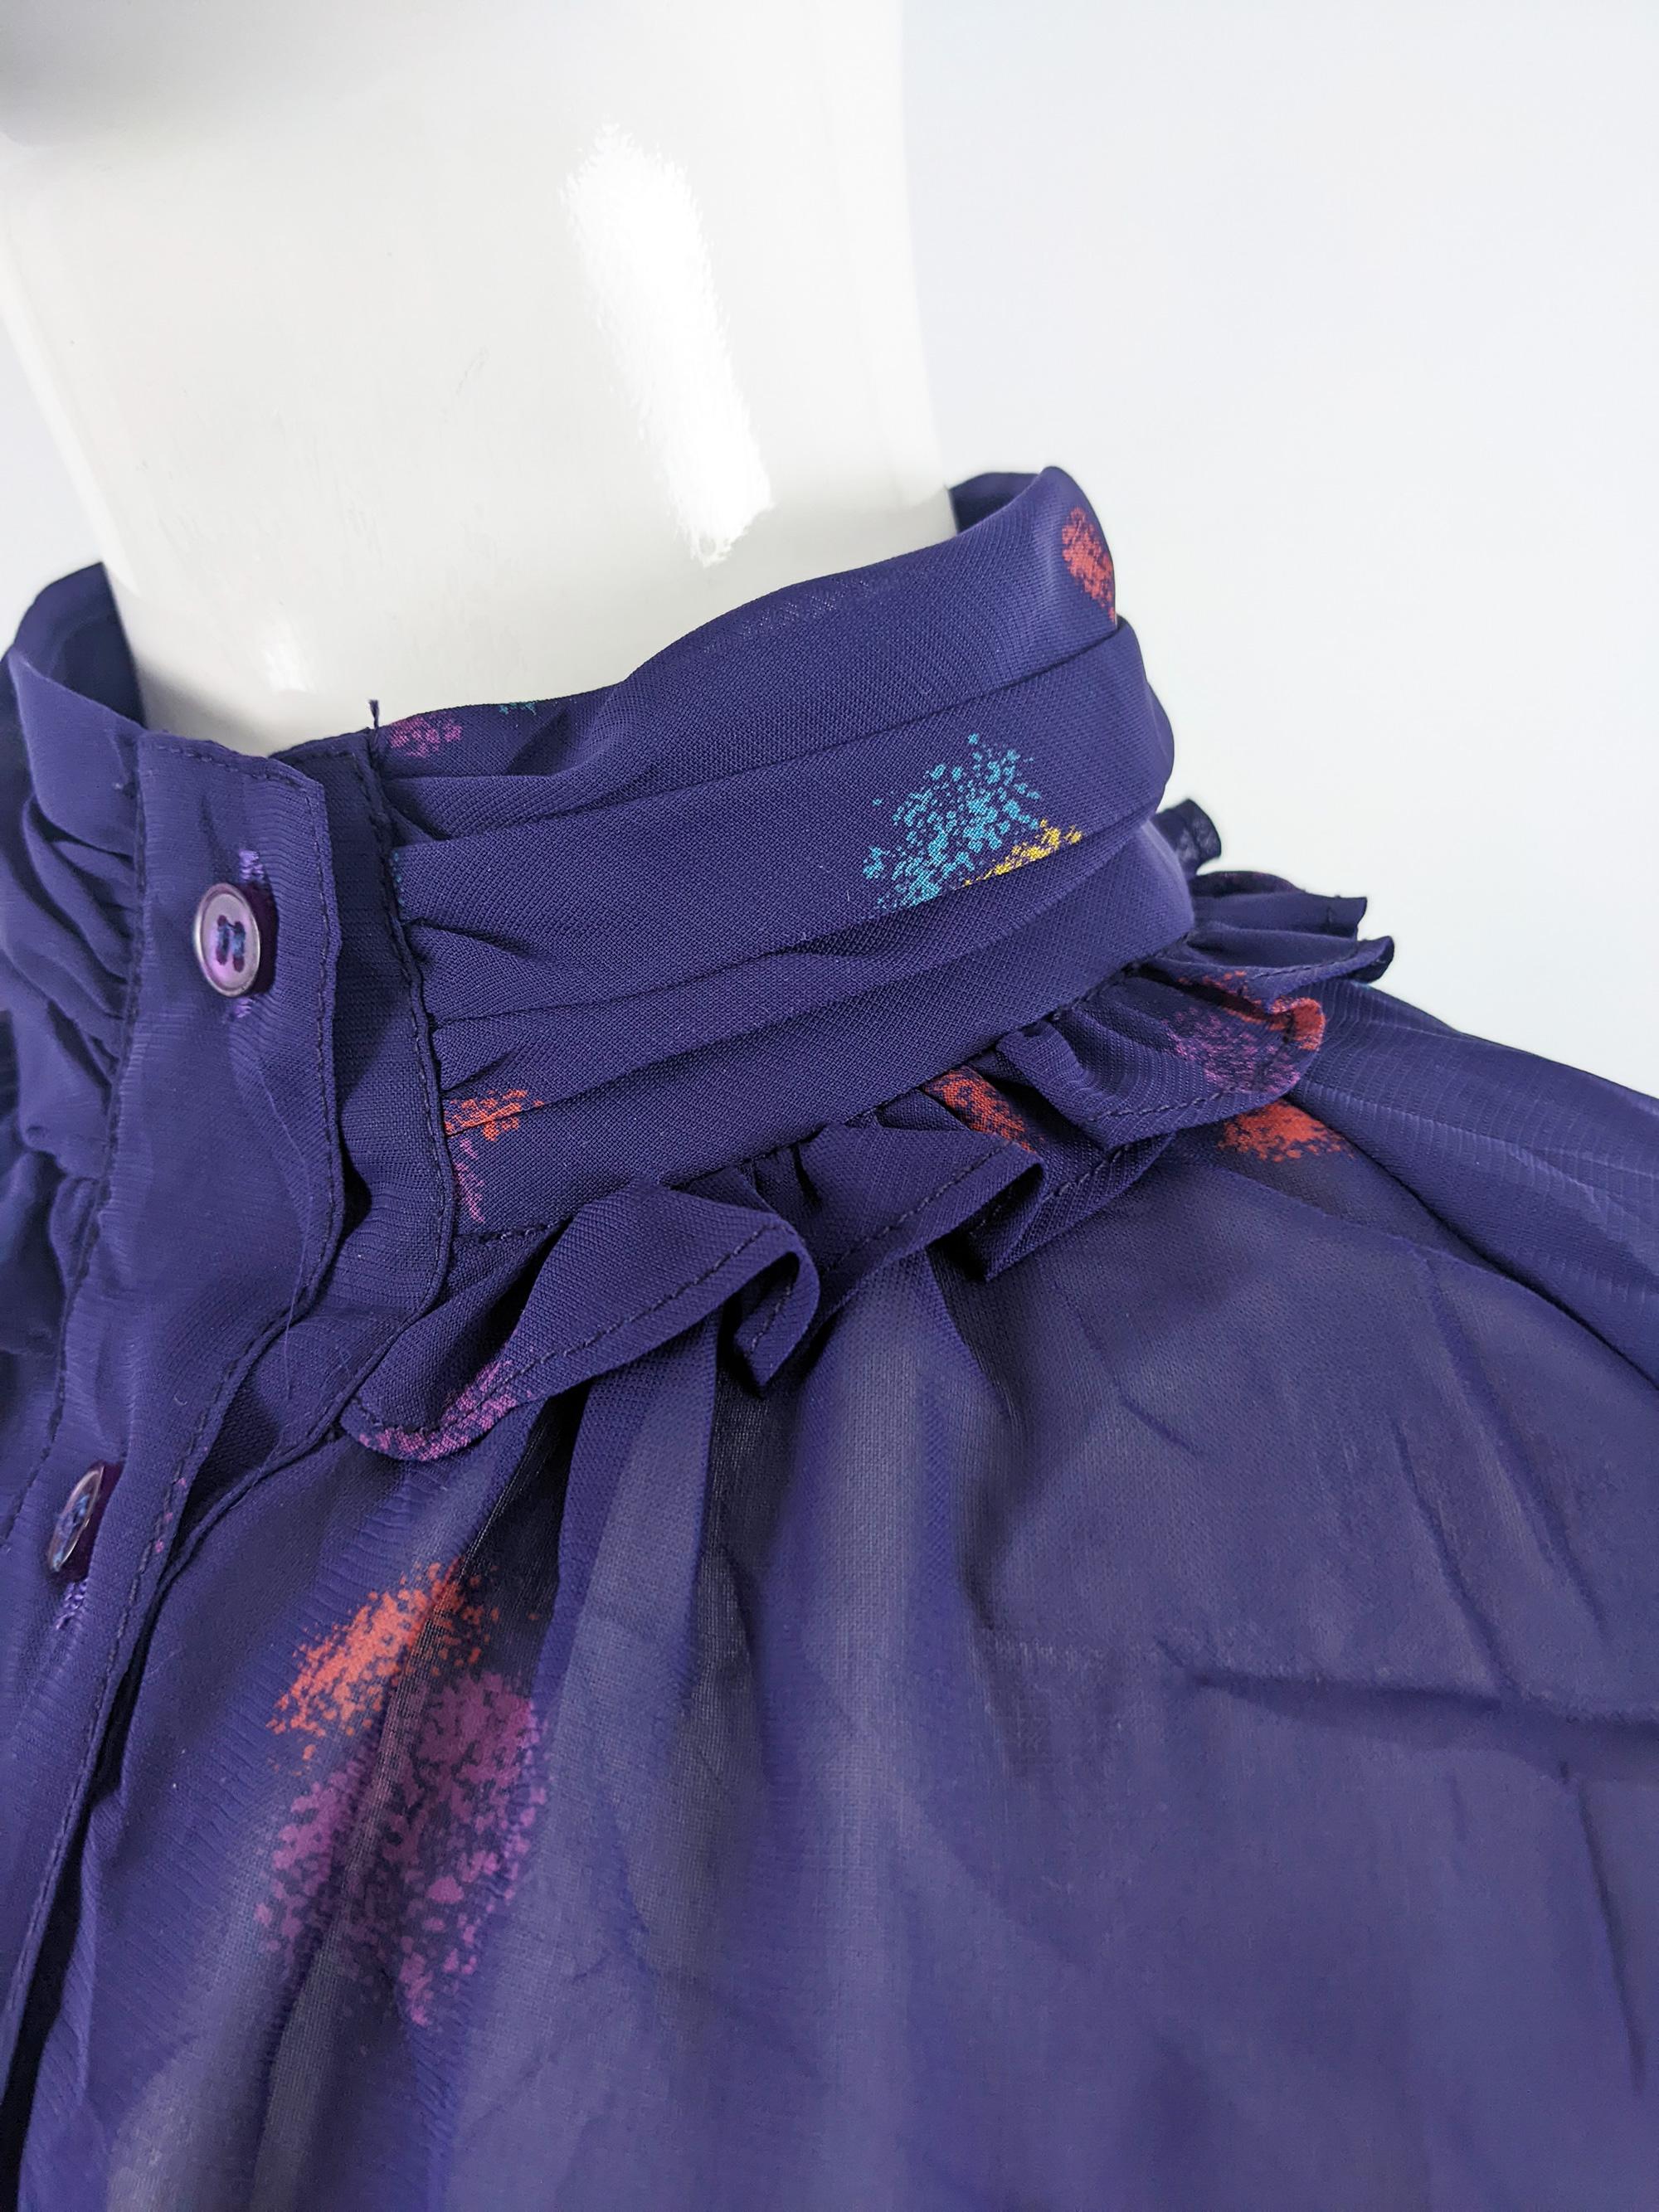 Aroche Paris Vintage 1970s Sheer Purple Ruffle Collar High Neck Shirt Dress In Excellent Condition For Sale In Doncaster, South Yorkshire